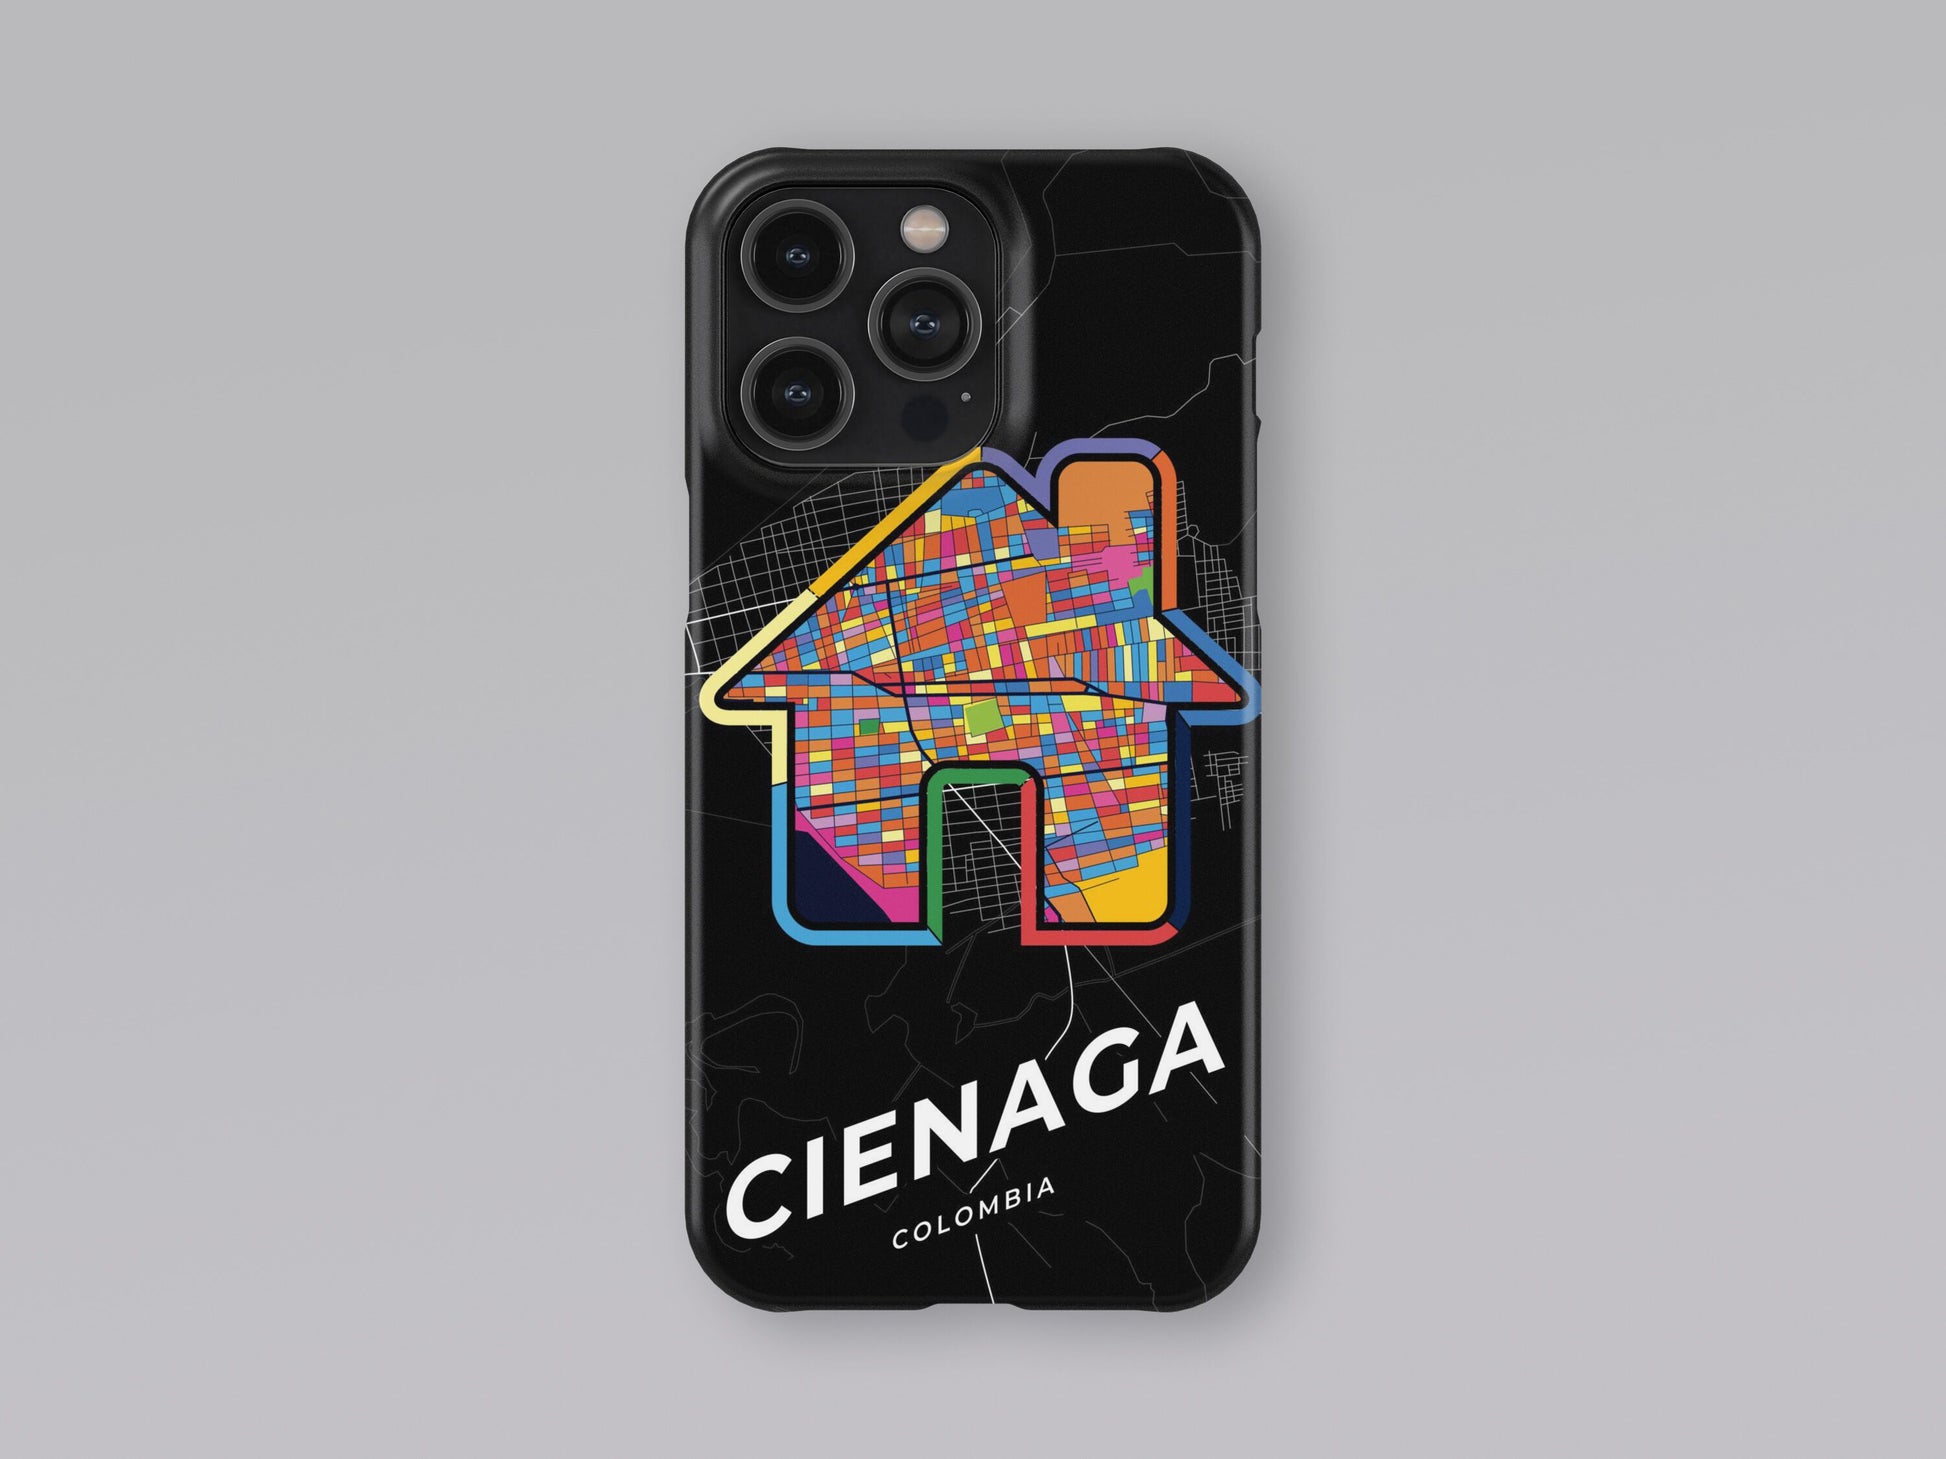 Cienaga Colombia slim phone case with colorful icon. Birthday, wedding or housewarming gift. Couple match cases. 3